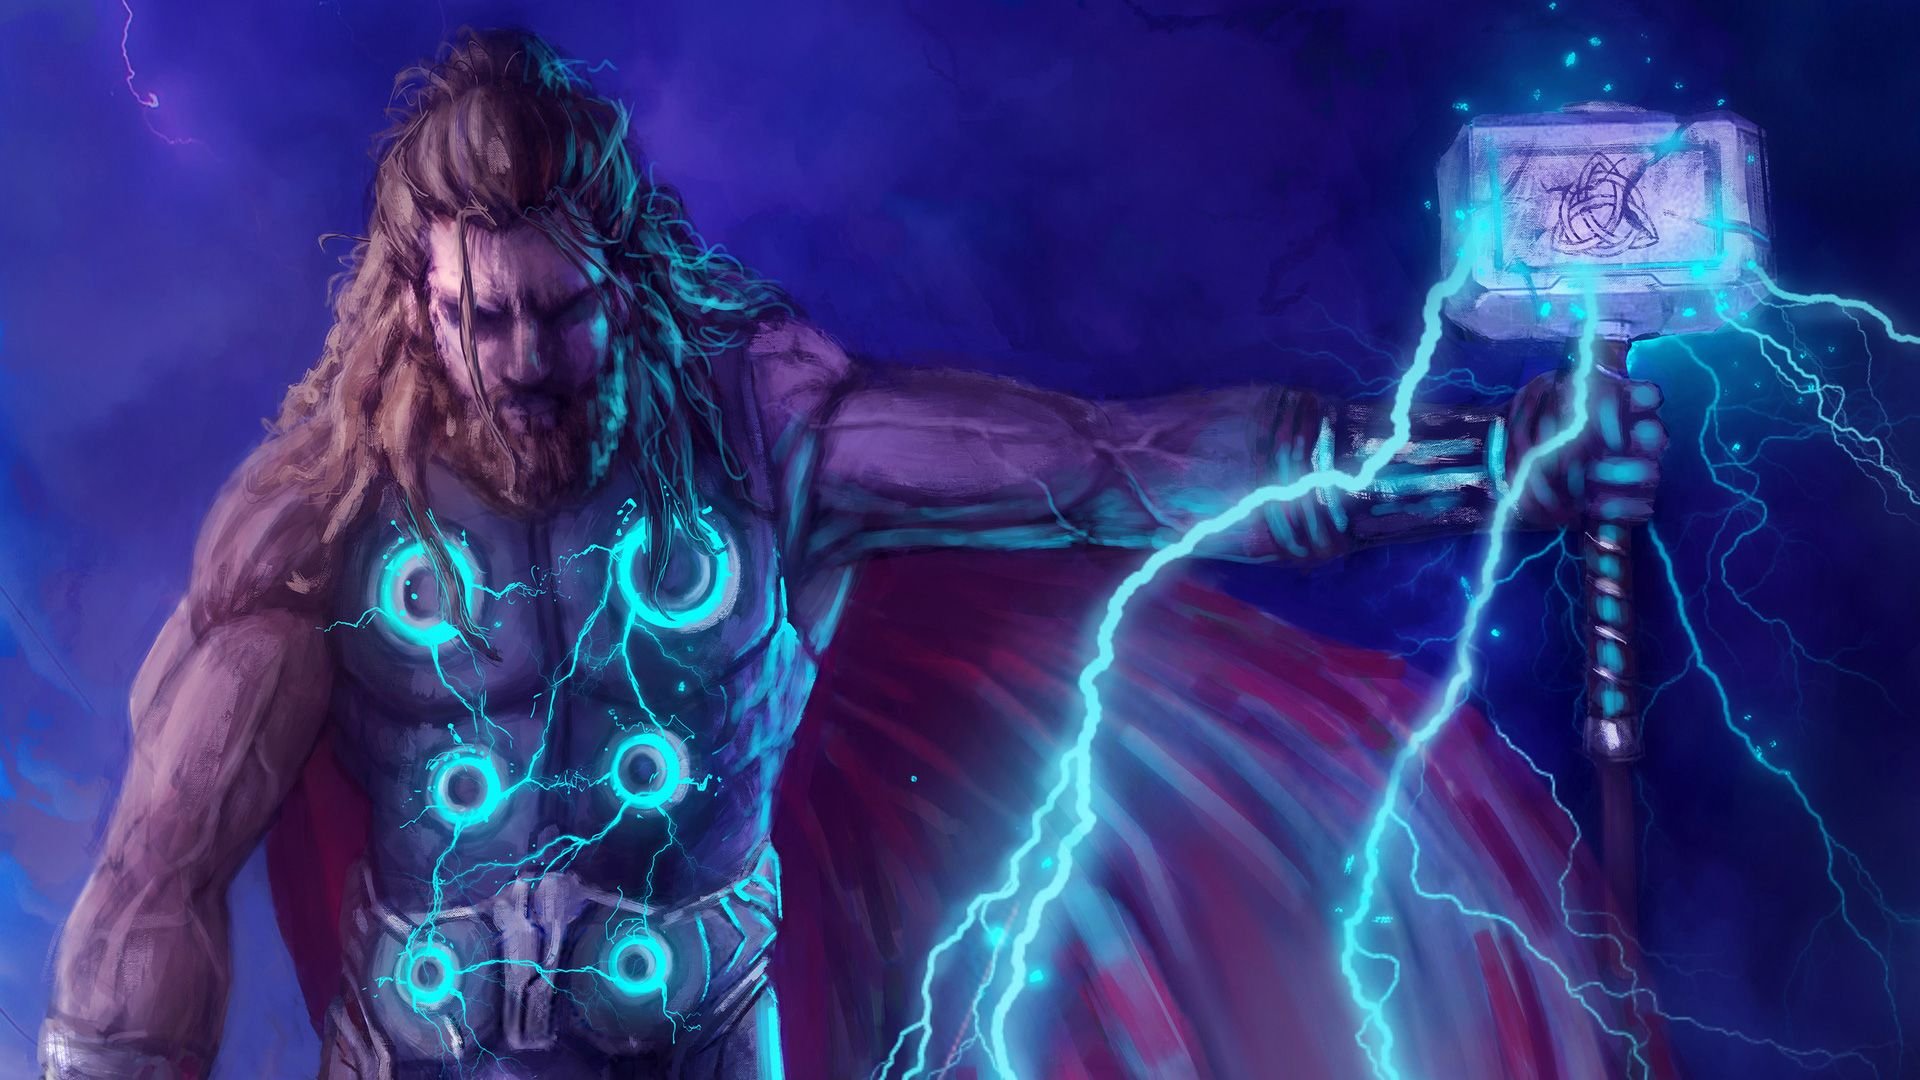 Thor hammers cock fairies free porn image